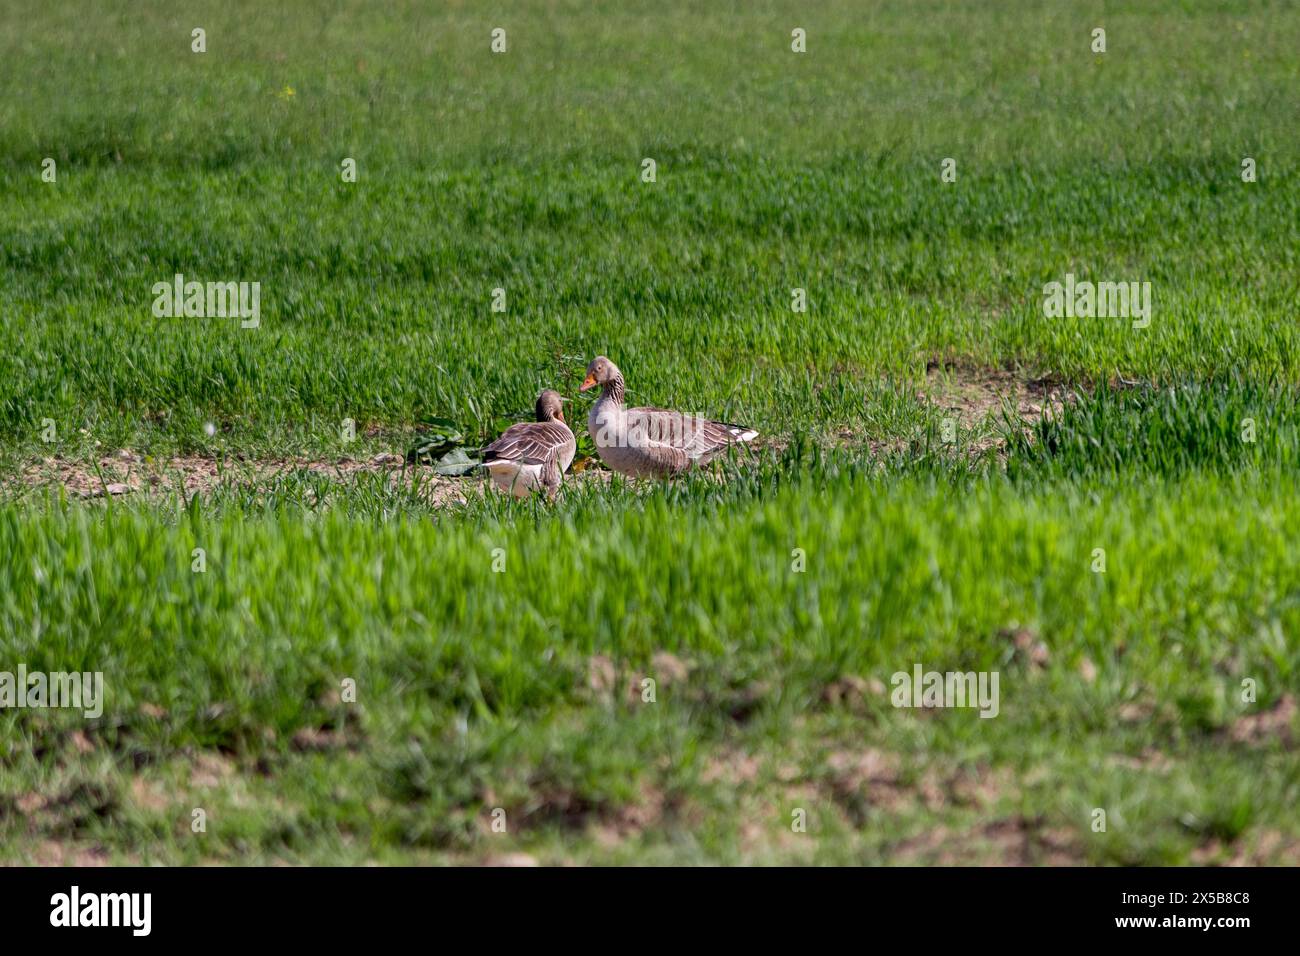 Wild geese in a newly sown field. Large Goose with white belly and rump searches for food. Stock Photo